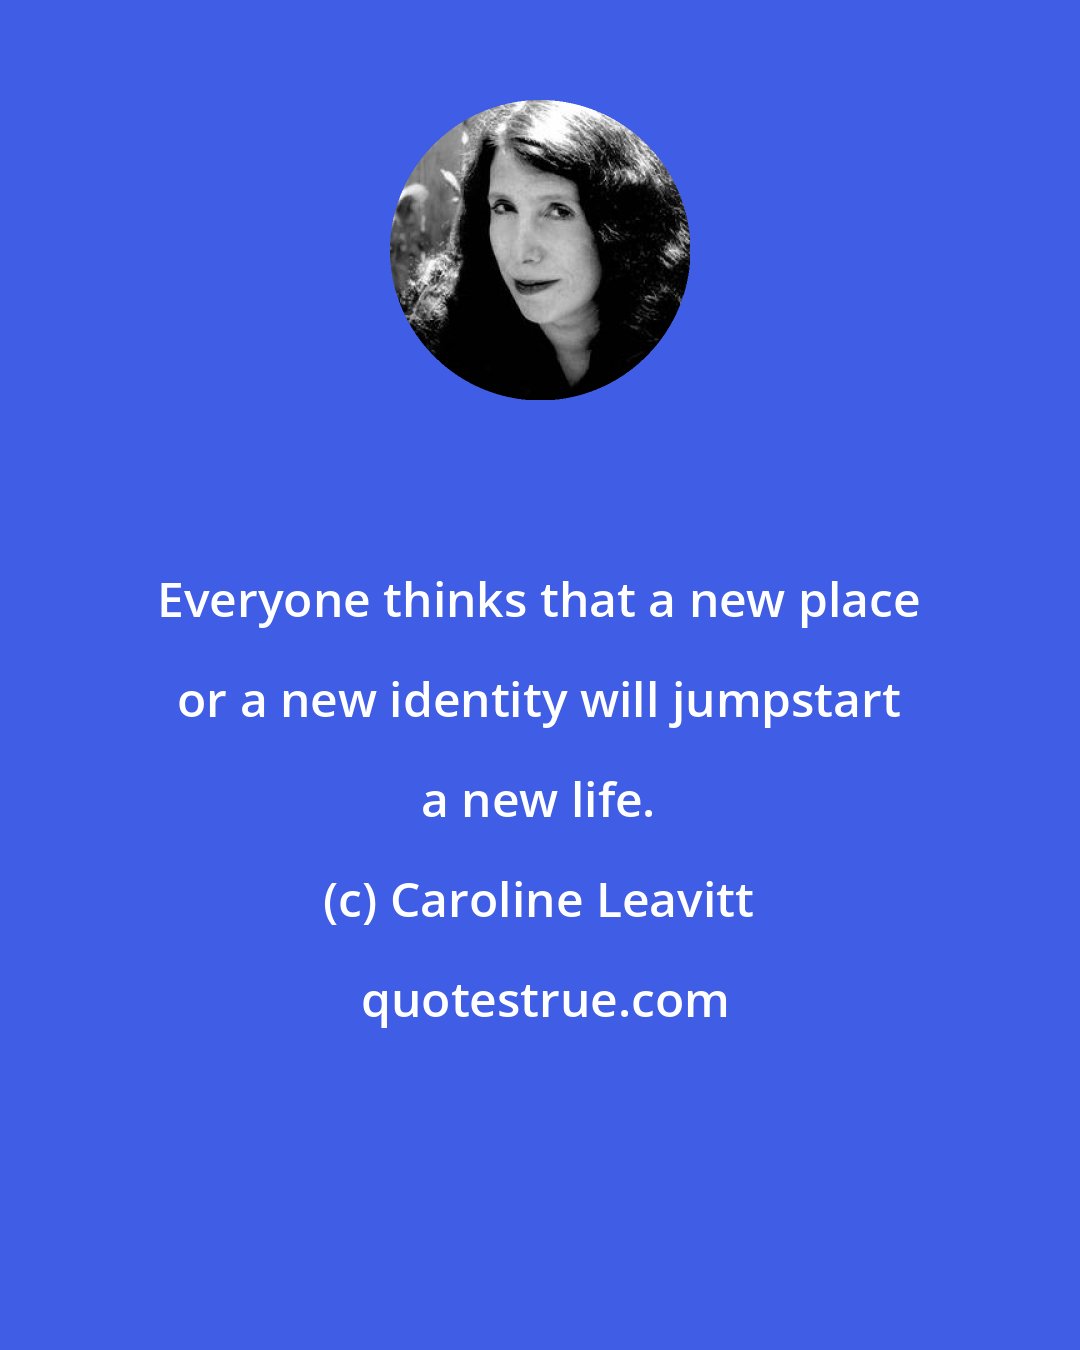 Caroline Leavitt: Everyone thinks that a new place or a new identity will jumpstart a new life.